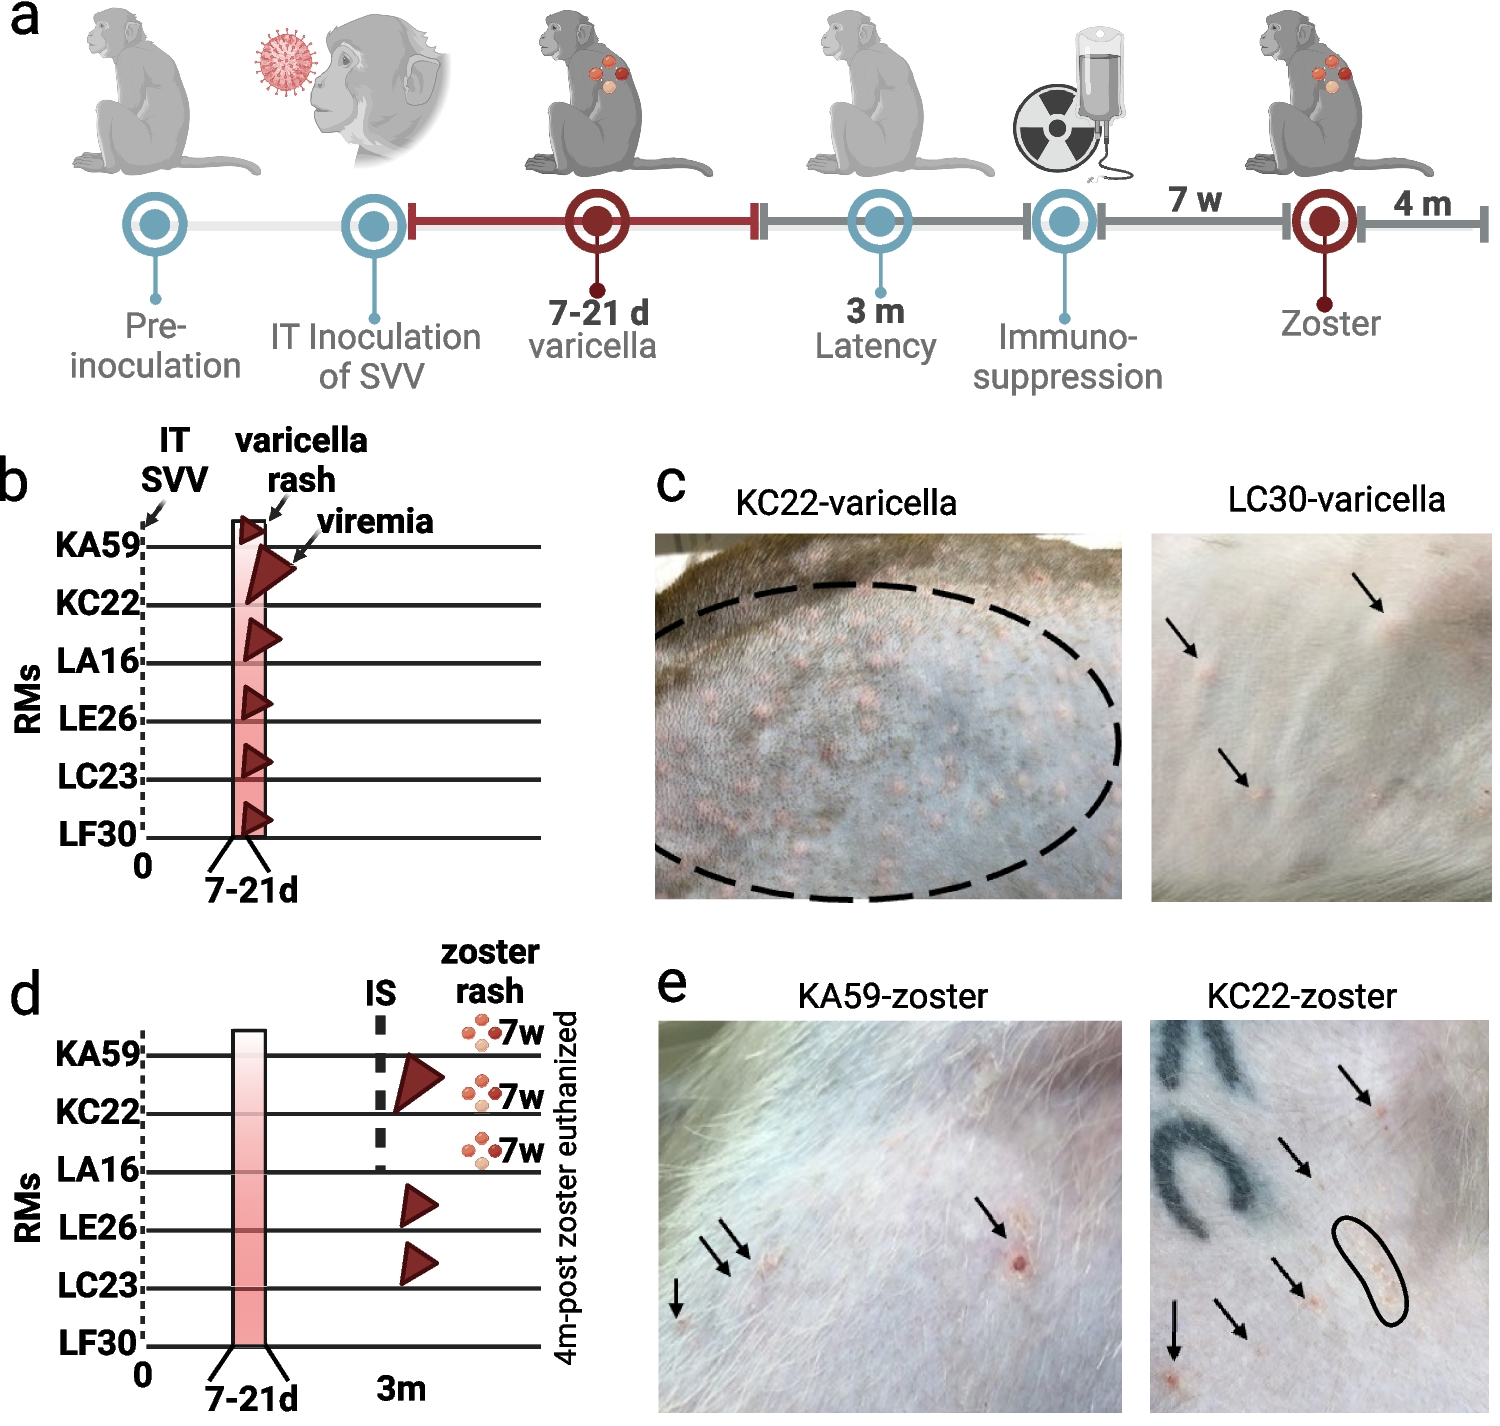 Simian varicella virus infection and reactivation in rhesus macaques trigger cytokine and Aβ40/42 alterations in serum and cerebrospinal fluid